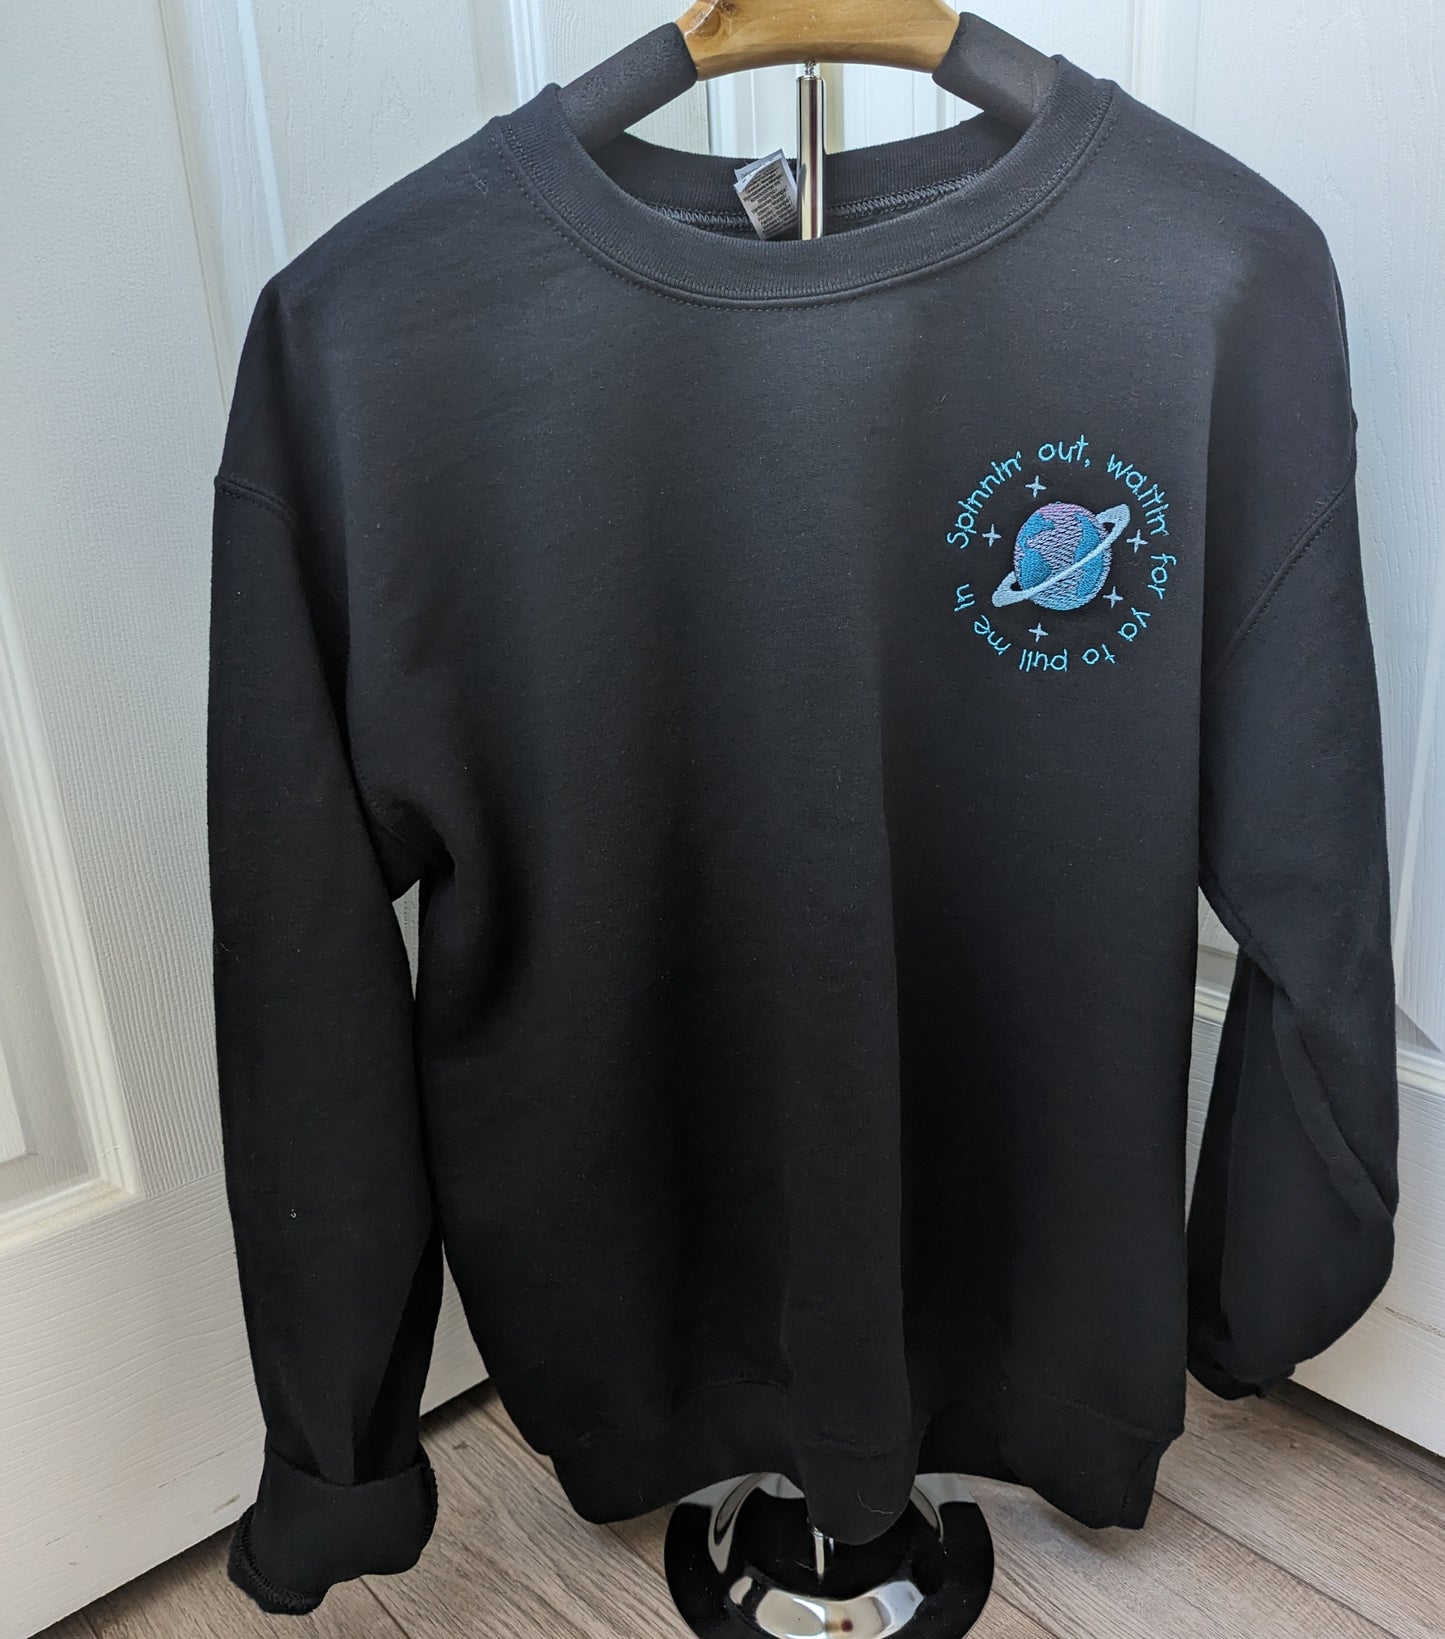 Harry Style Embroidered Sweatshirt, Spinning out